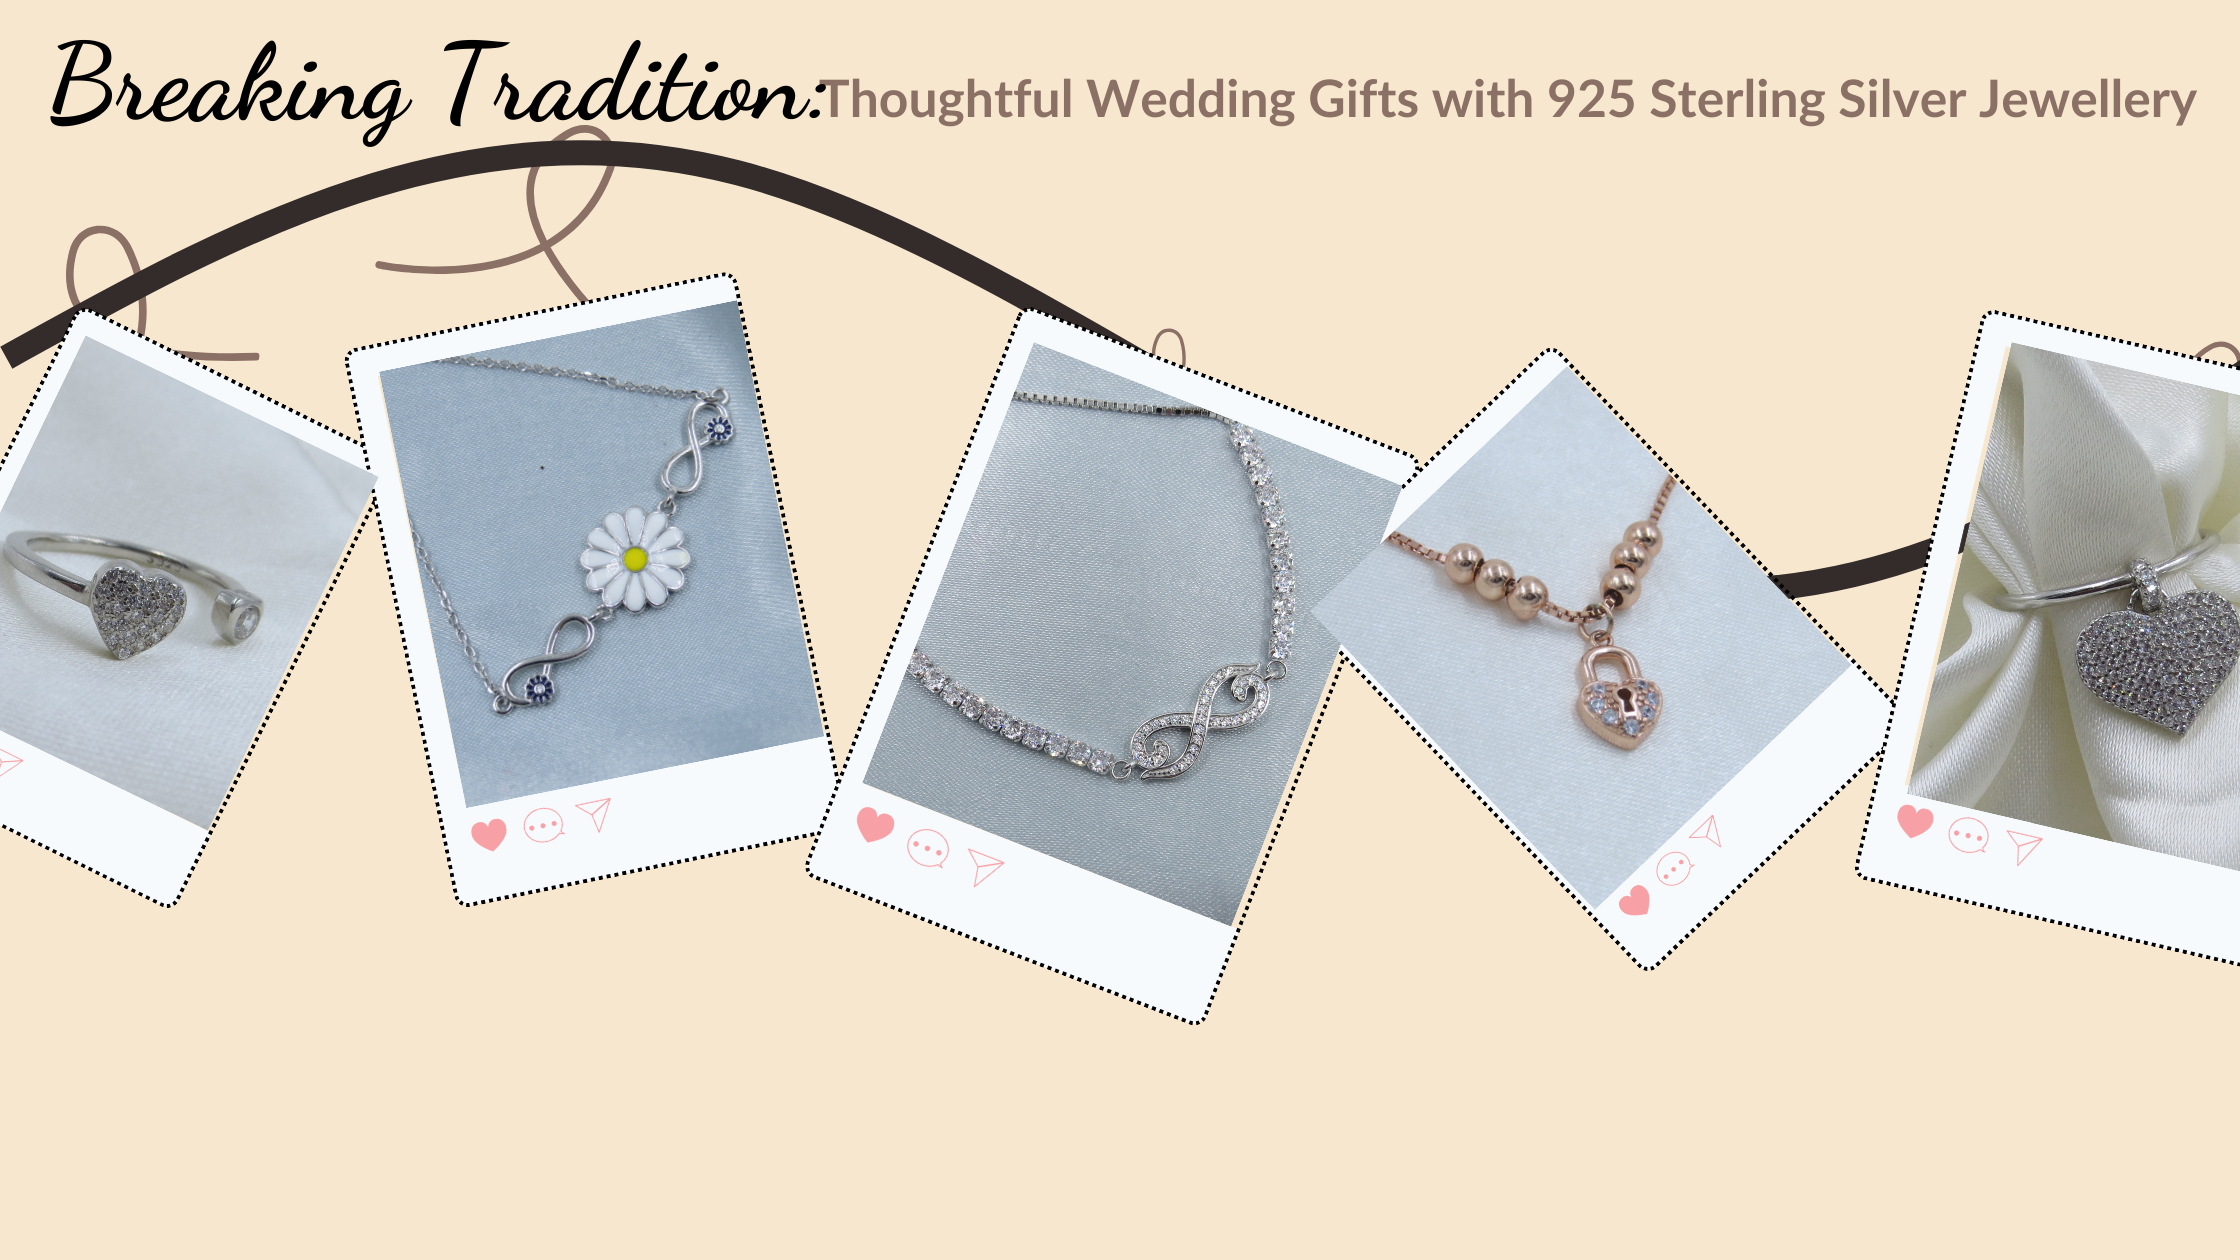 Groom to Bride Gift - 925 Sterling Silver